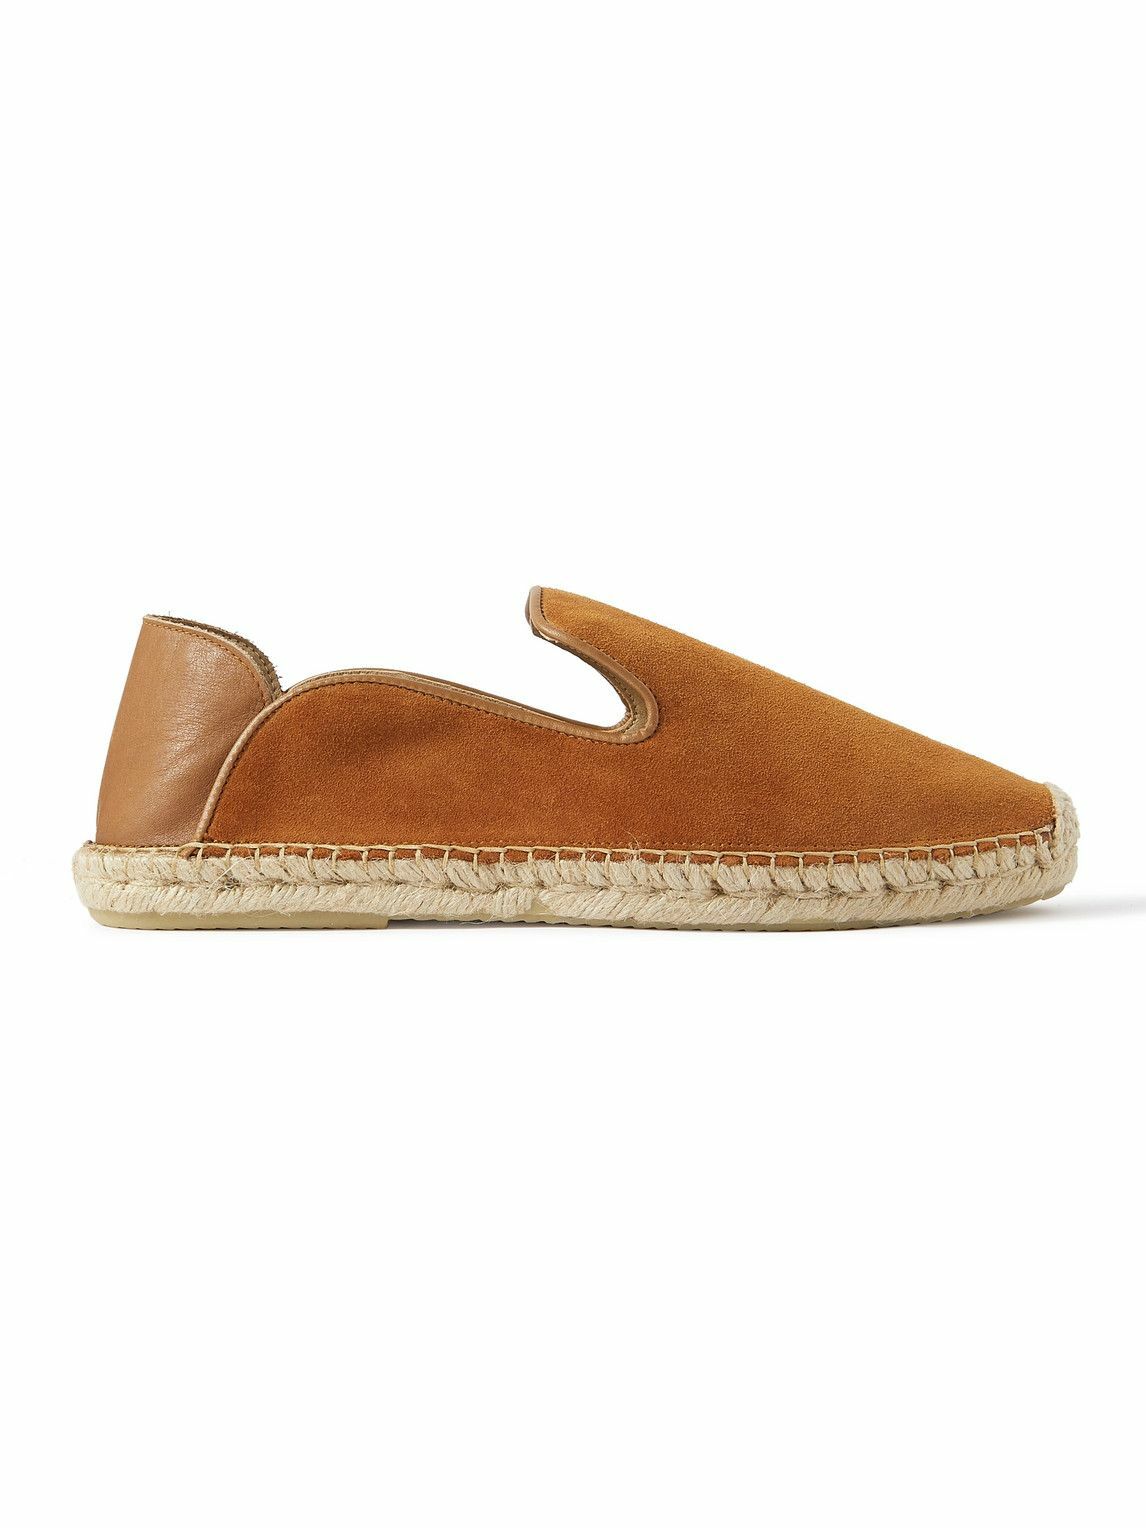 Mens Shoes Slip-on shoes Espadrille shoes and sandals Frescobol Carioca Collapsible-heel Leather-trimmed Suede Espadrilles in Brown for Men 